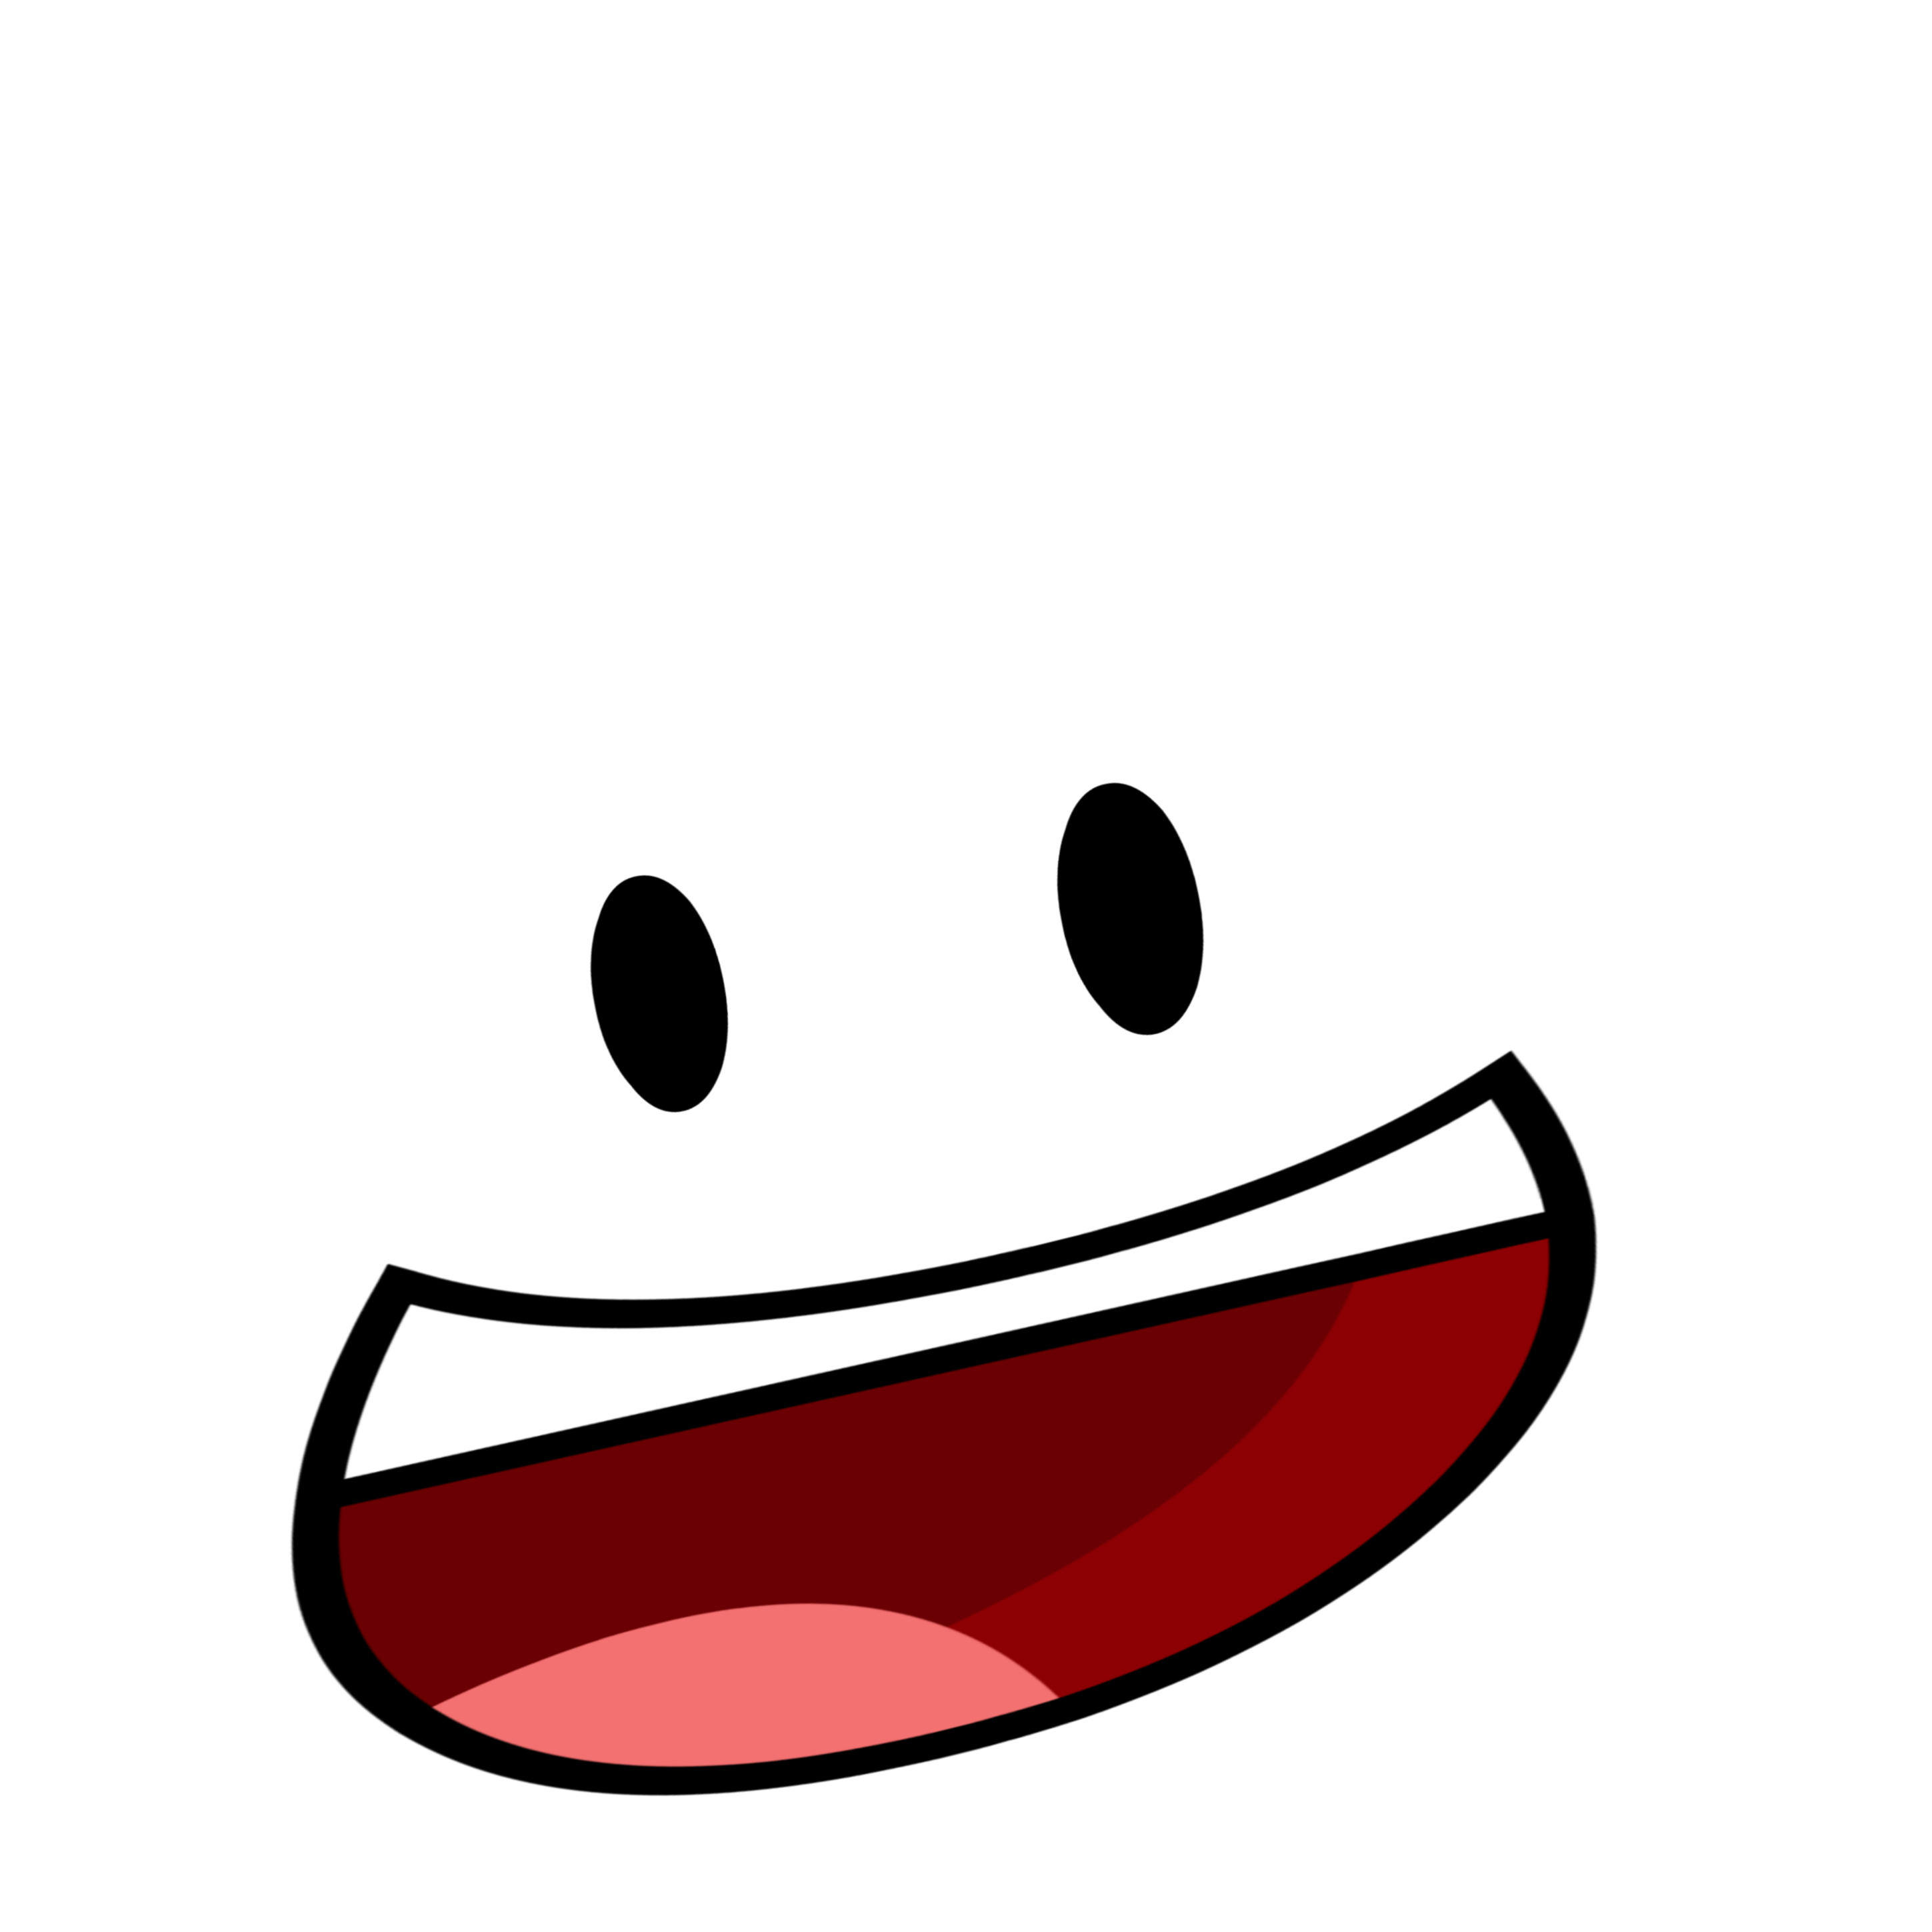 Bfdi Face Bfb Freetoedit Bfdi Sticker By Guythecooler